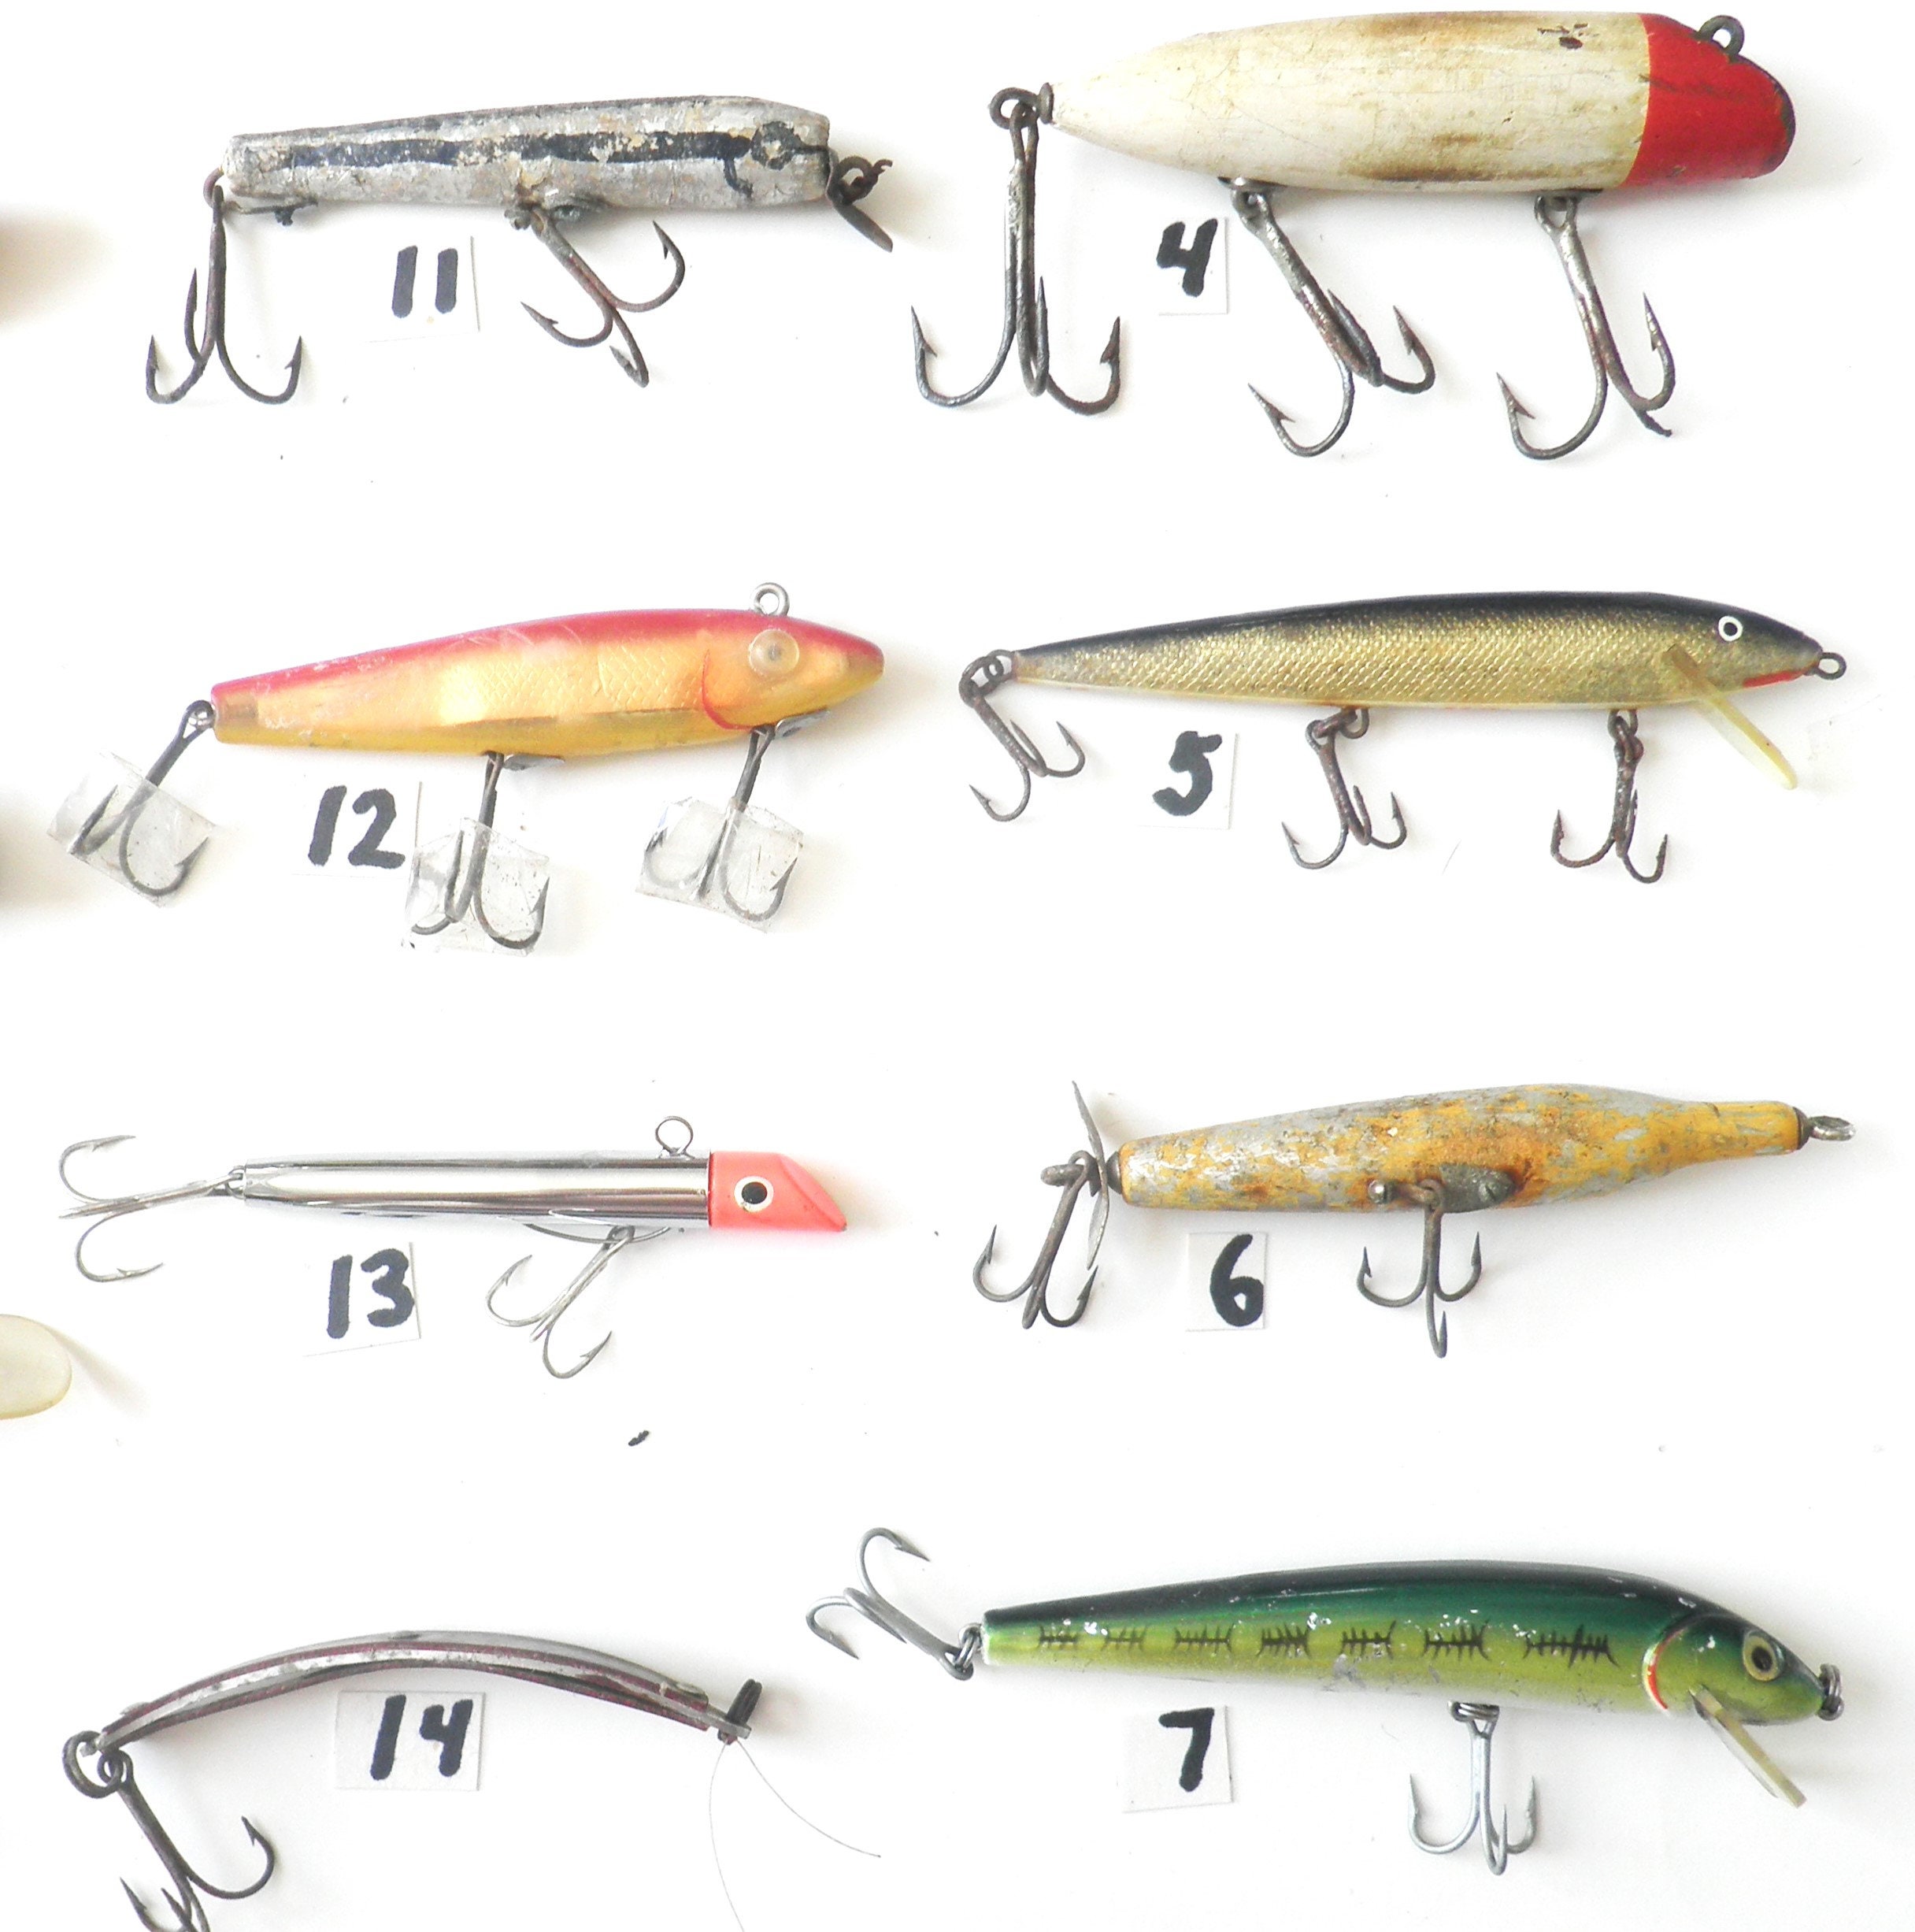 fishing lure collectibles an identification and value guide to the most  collectible antique fishing lures - AbeBooks